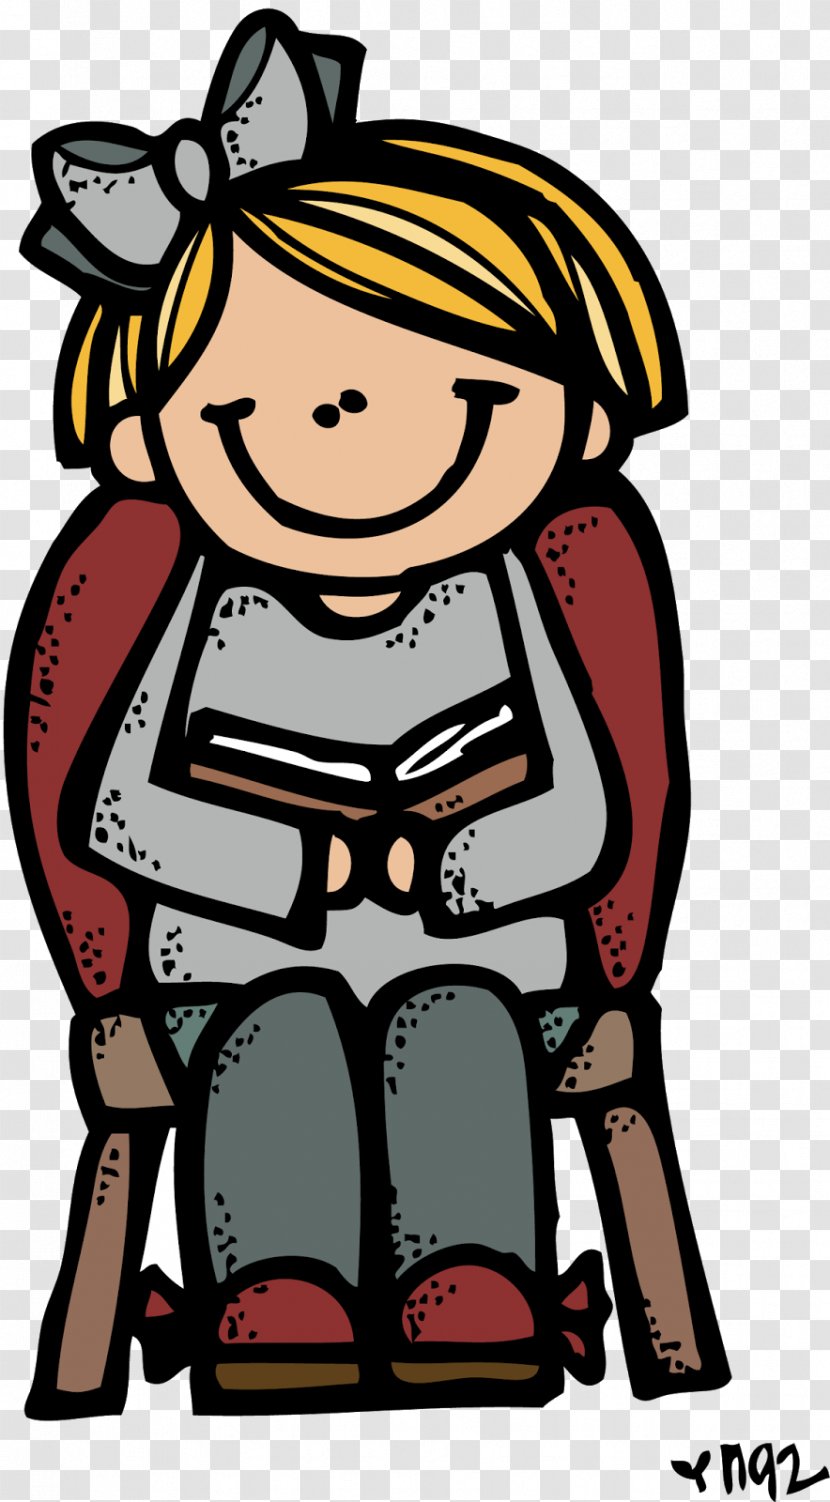 Reading Writing Teacher Clip Art - First Grade - Struggling To Move Themselves Transparent PNG